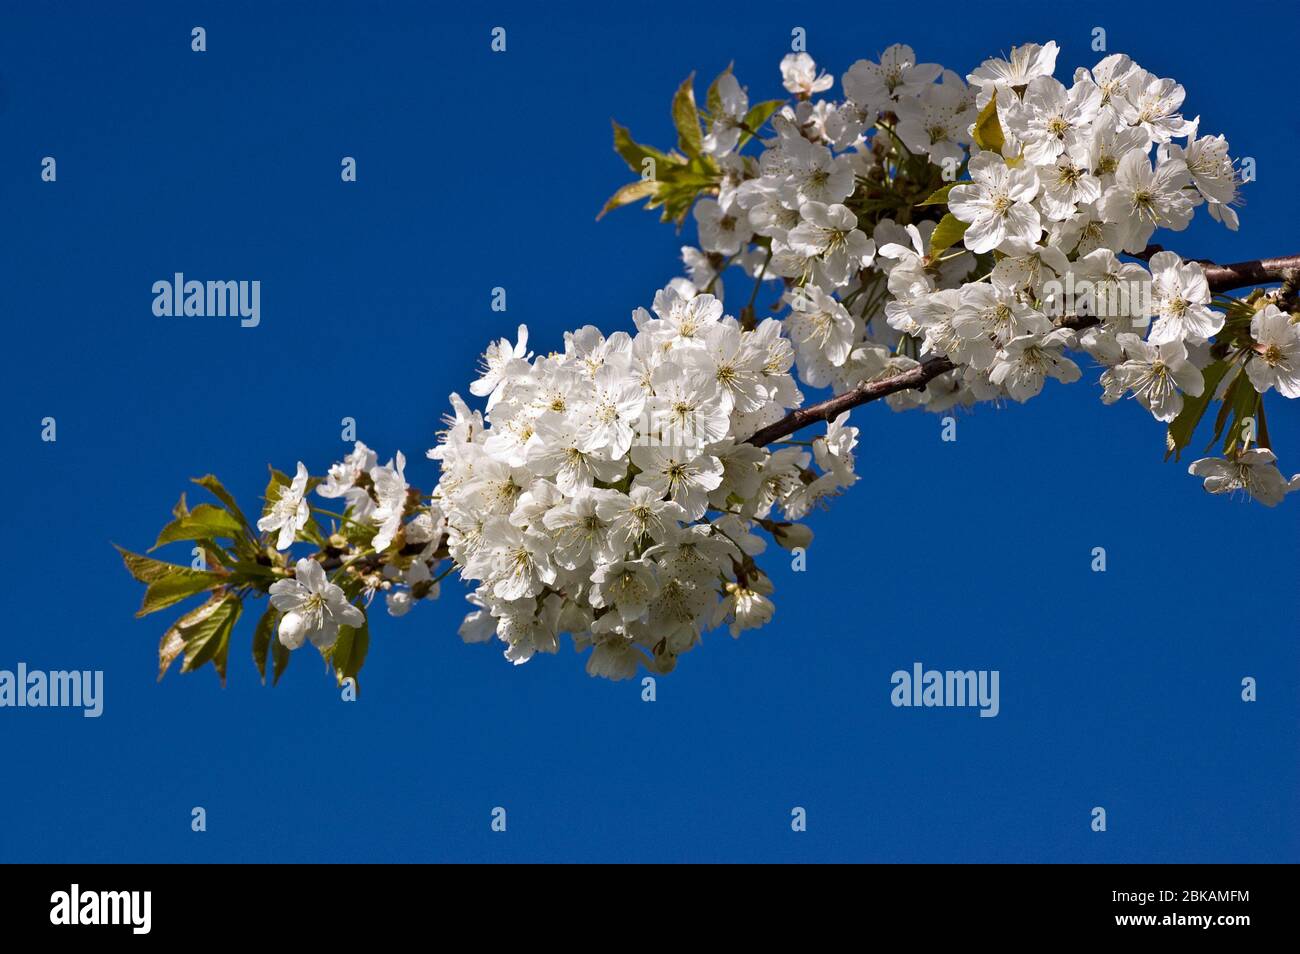 A flowering cherry tree bursting with white blossom in the spring. Stock Photo